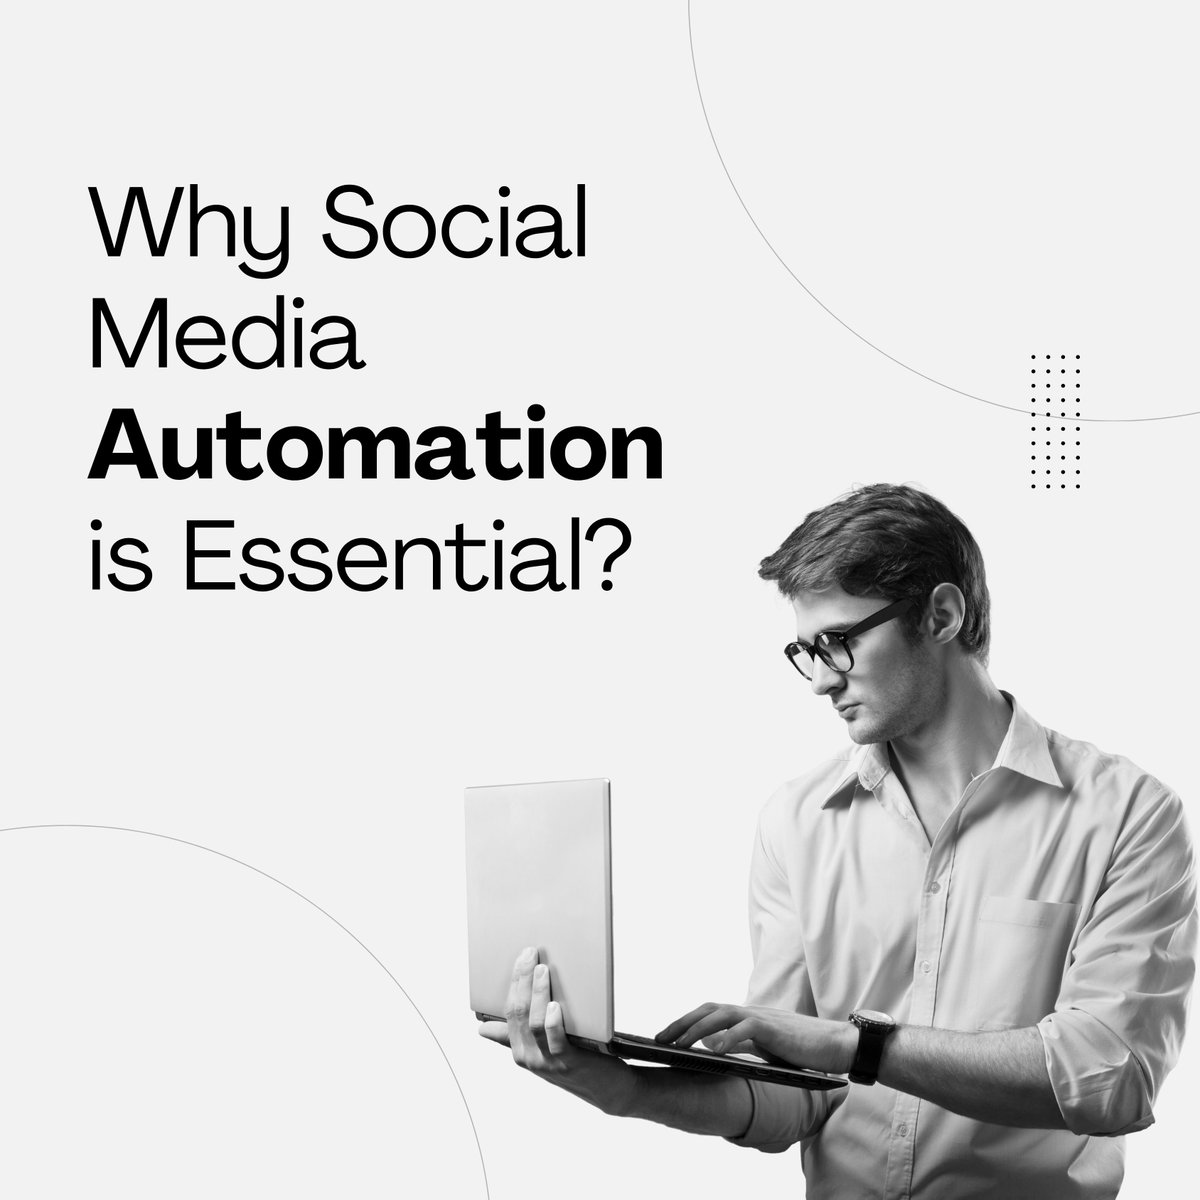 Importance of Social Media Automation #SocialMediaAutomation #MarketingAutomation #SocialMediaTools